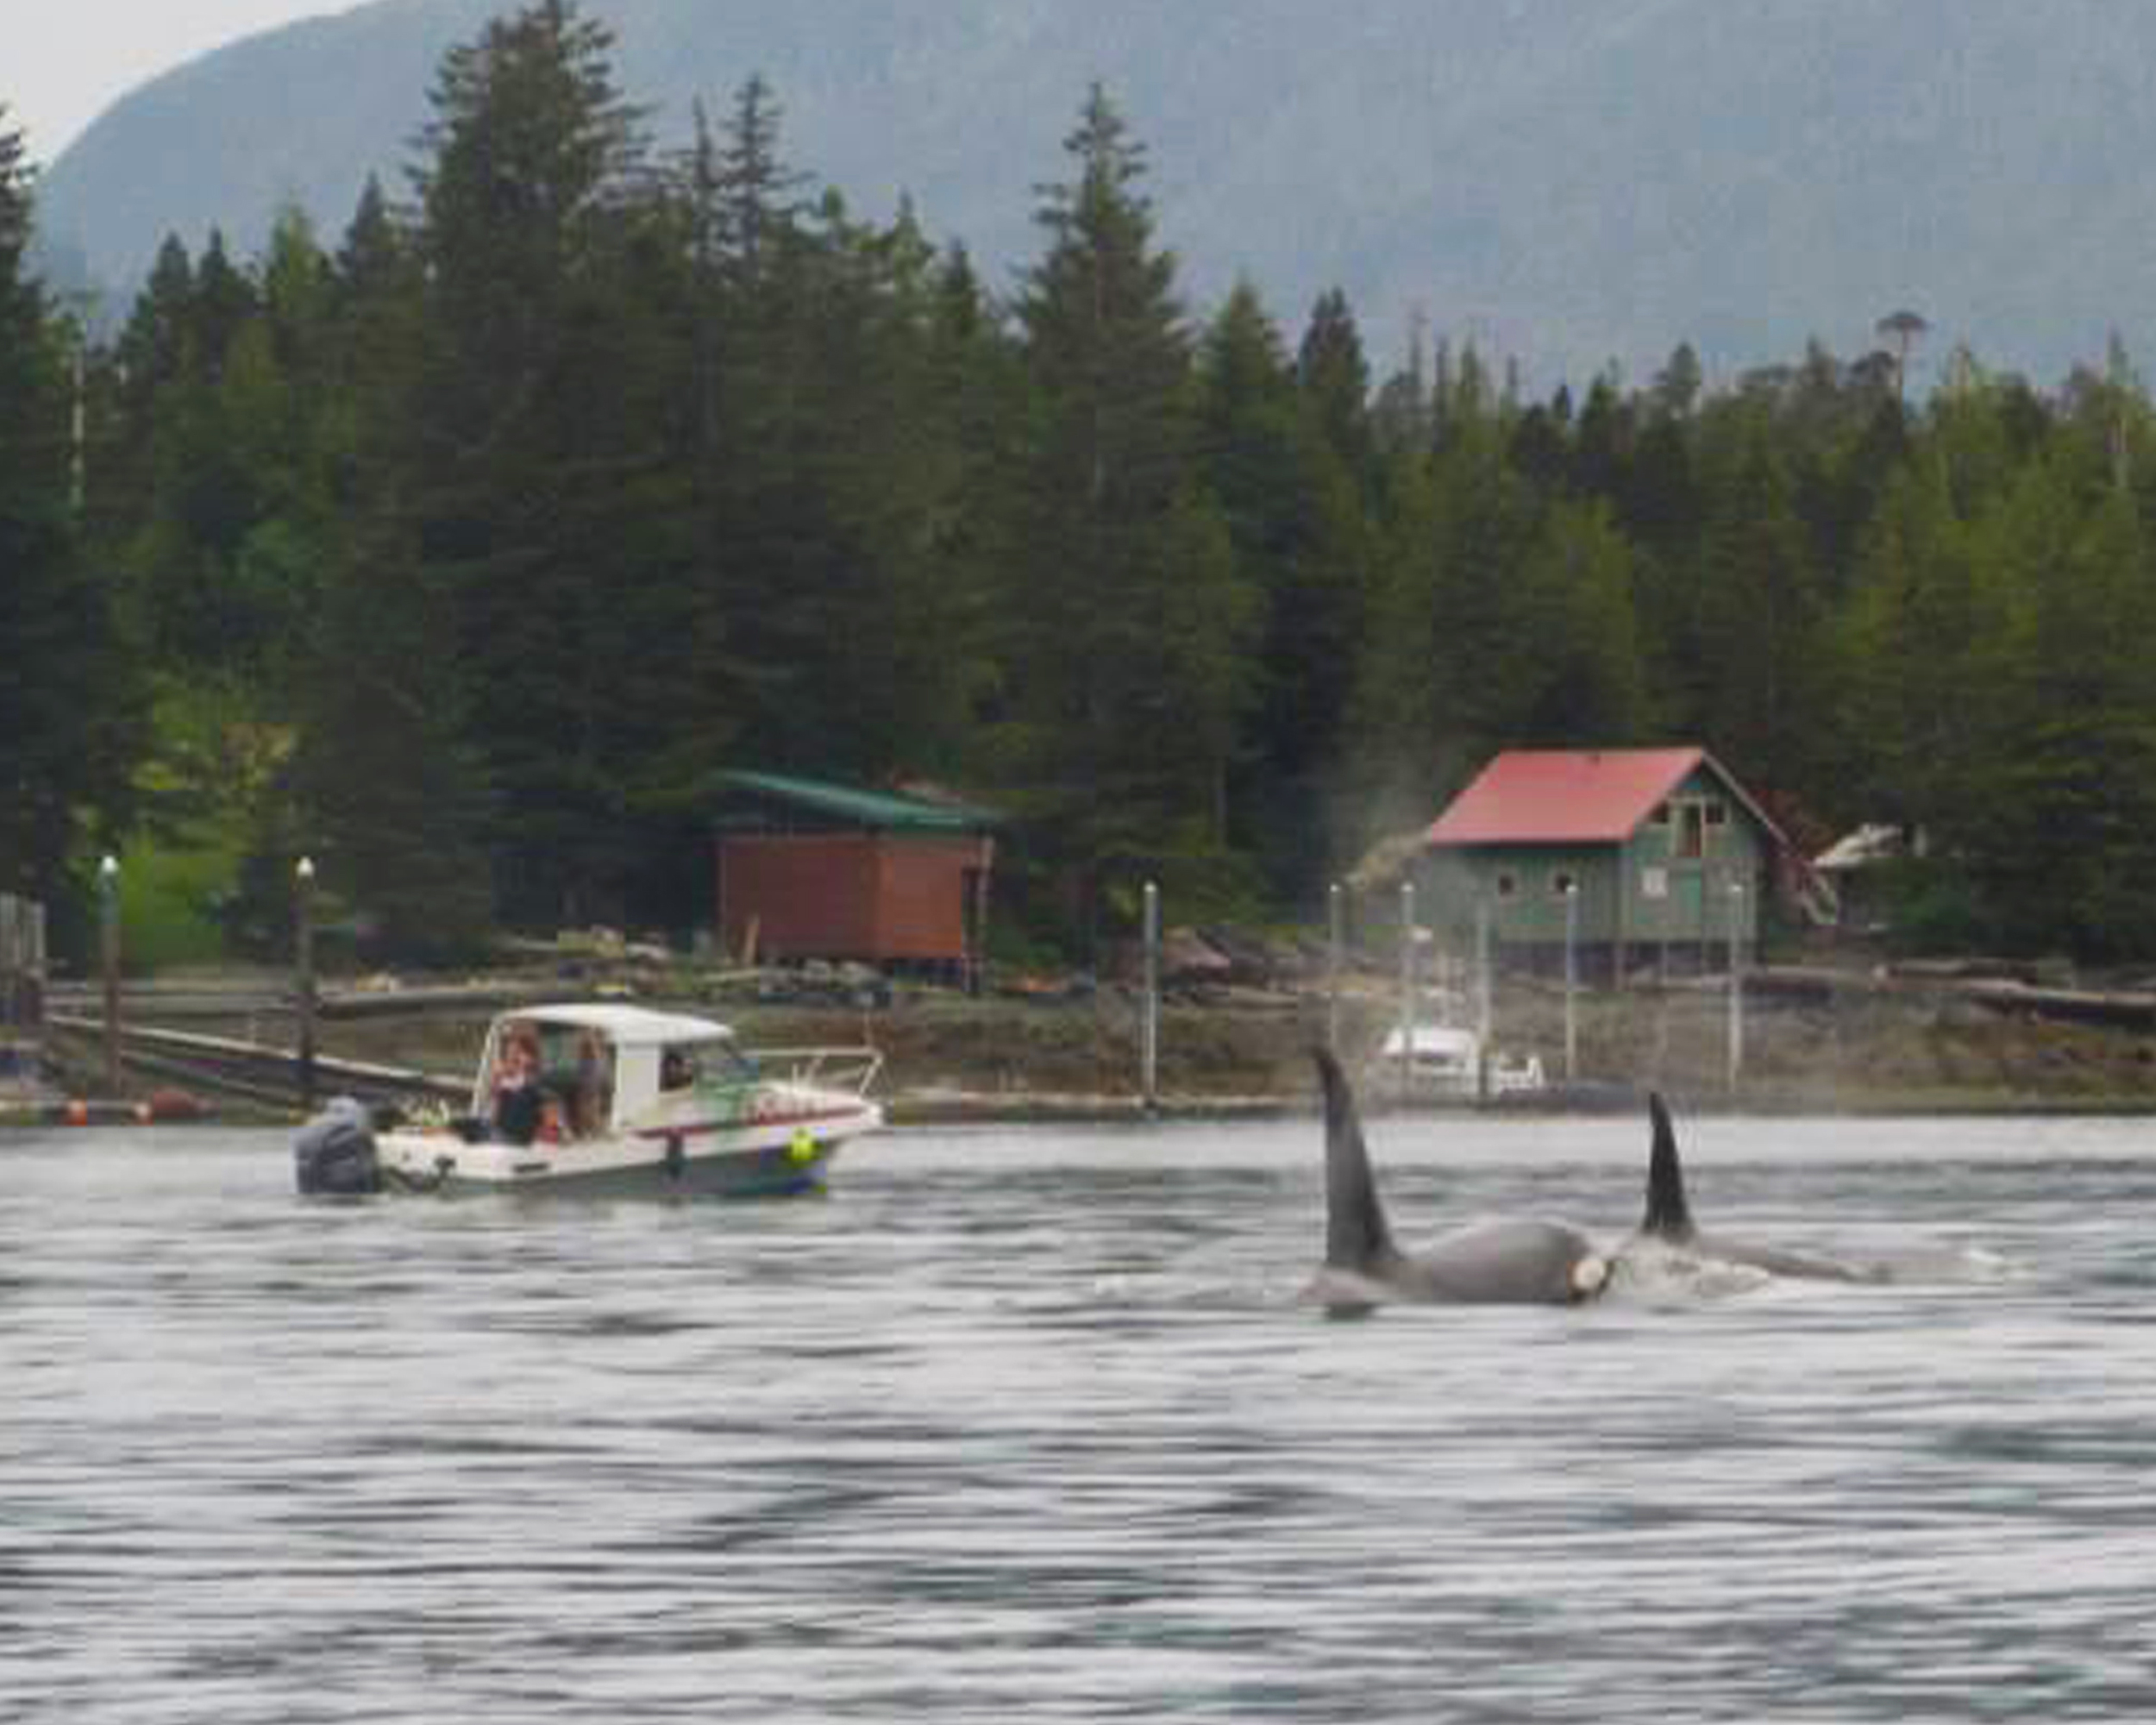  Whales are a common sight in the Tongass Narrows in front of Ketchikan. 